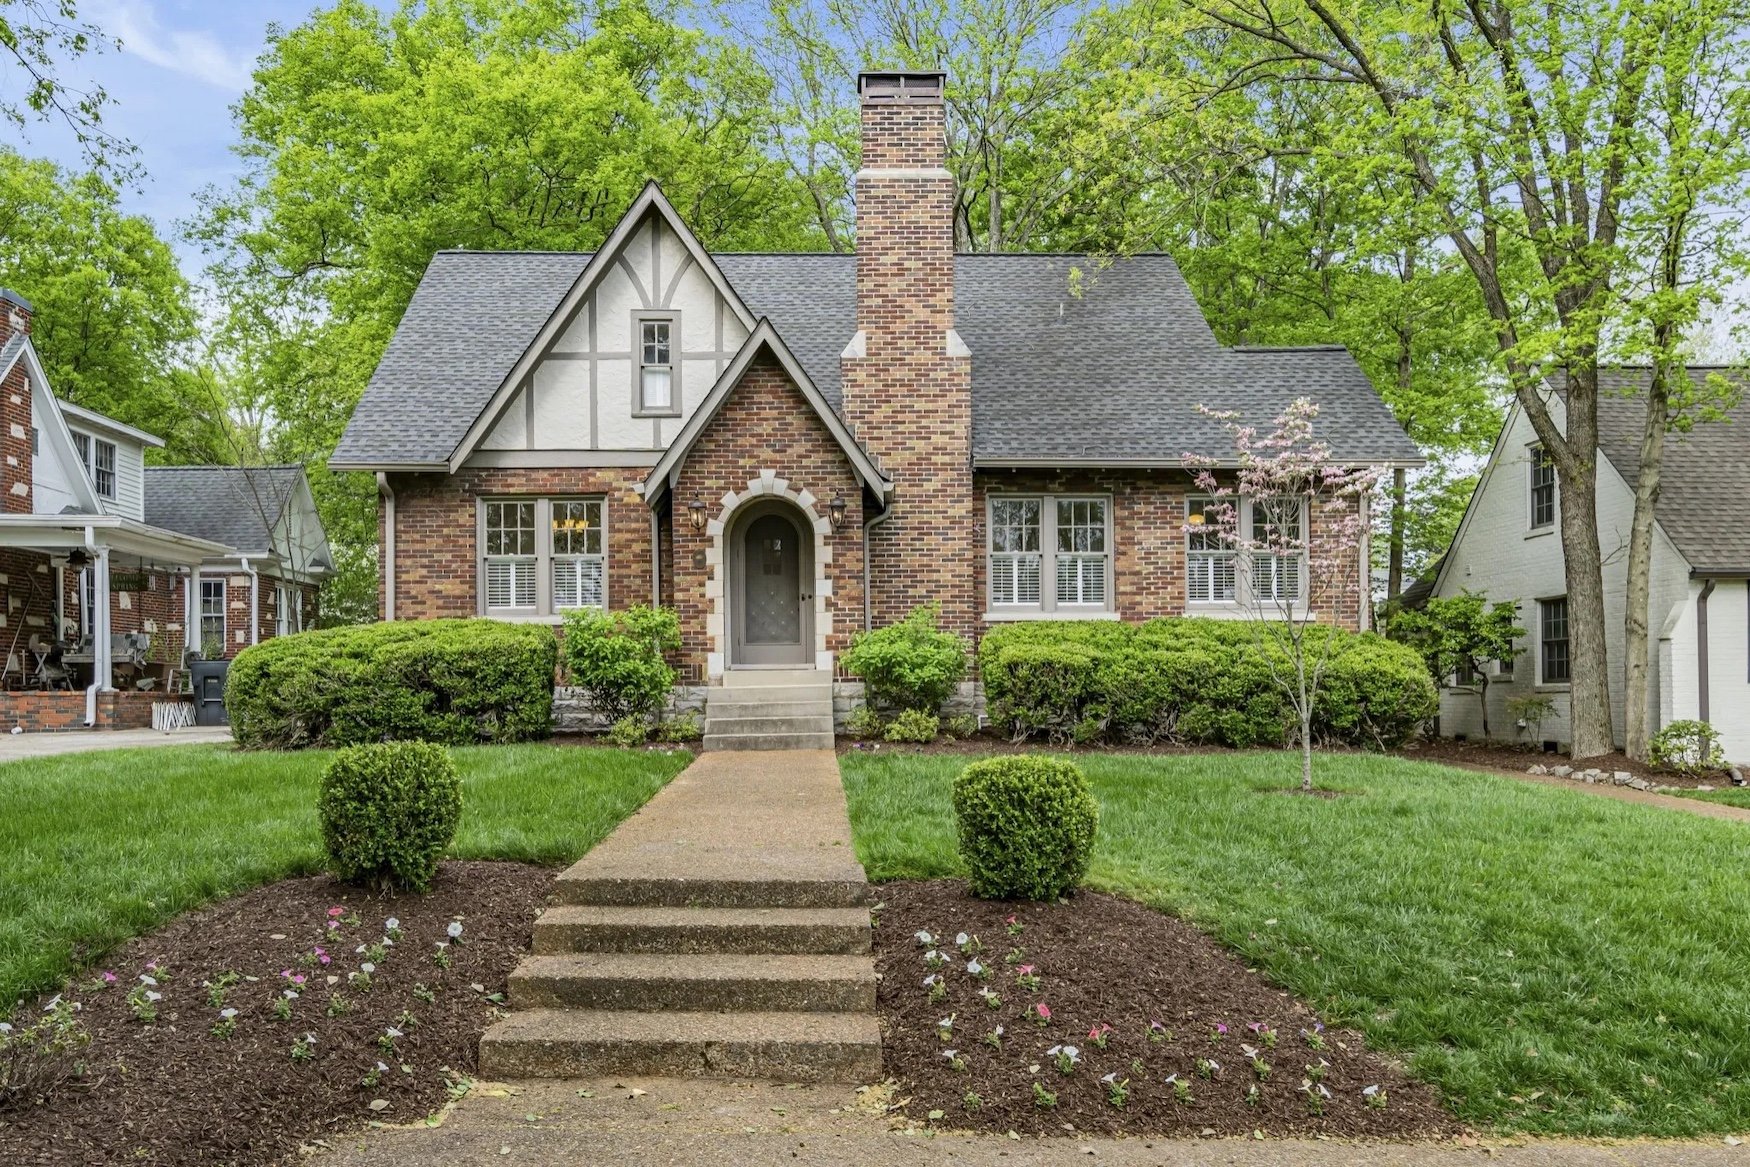 1920s Brick Tudor Revival With A Private Yard Selling For $1.29M!